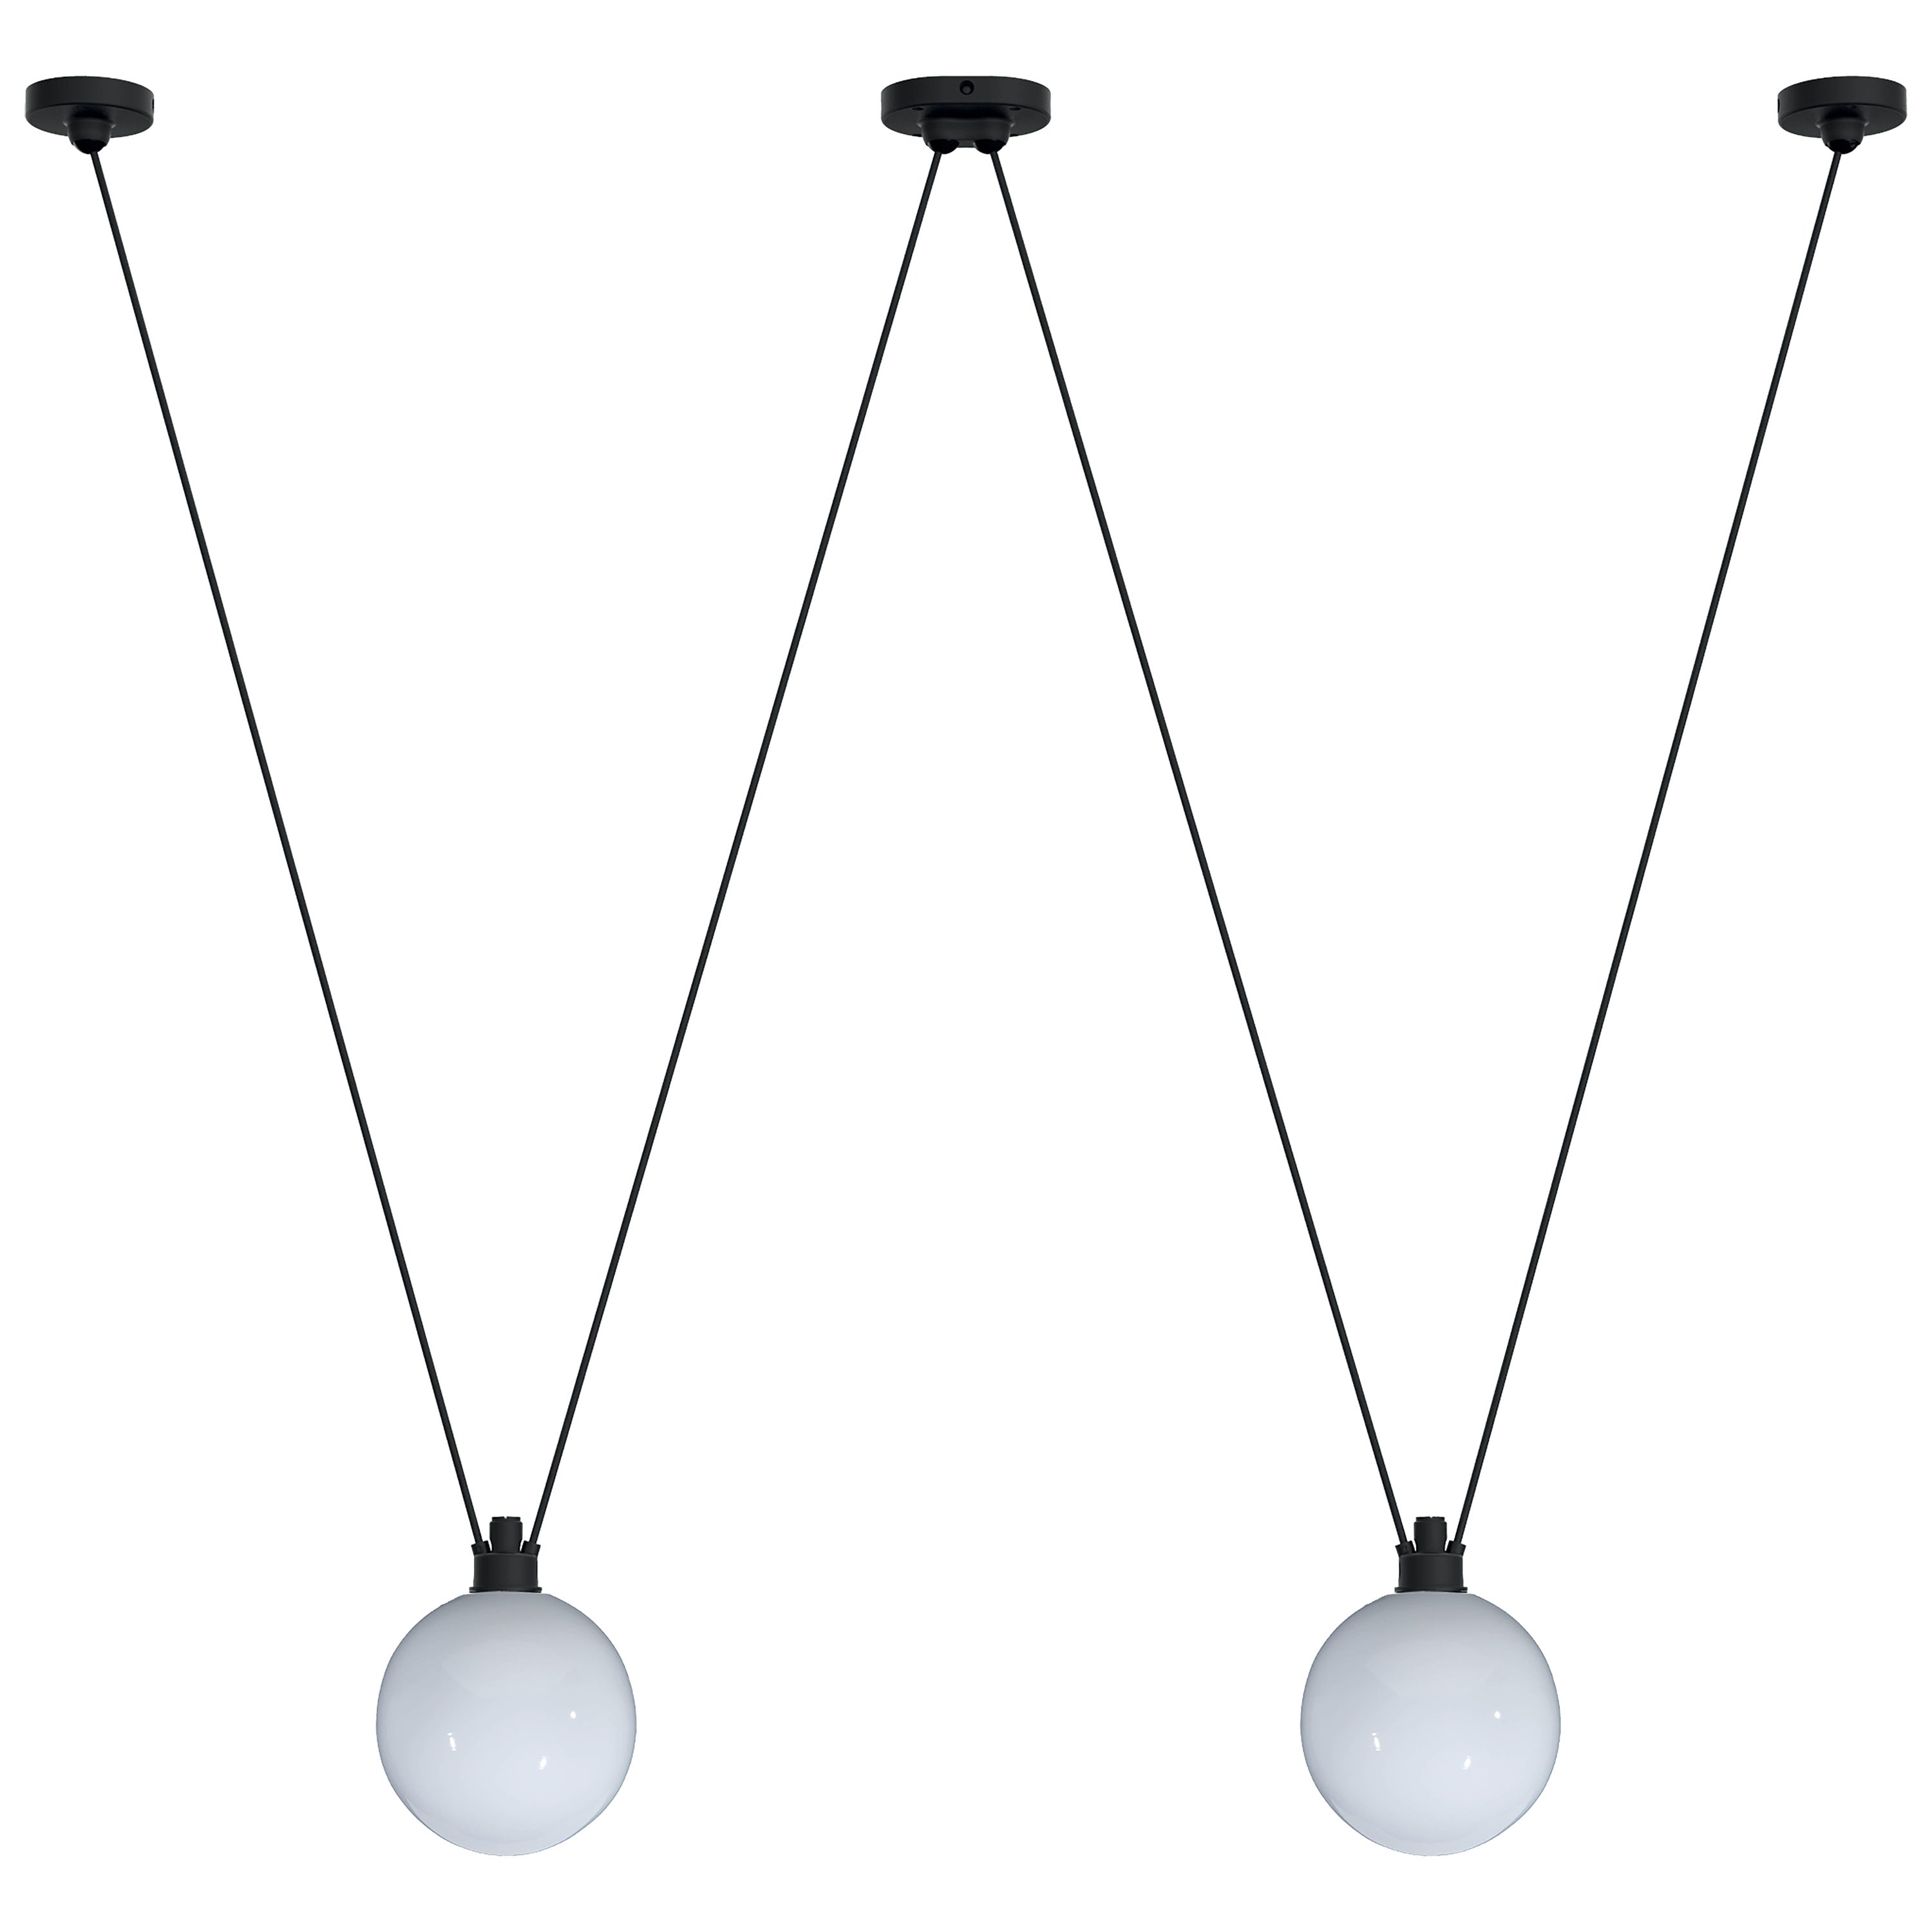 DCW Editions Les Acrobates N°324 Pendant Lamp in Black Arm and Large Glassball For Sale